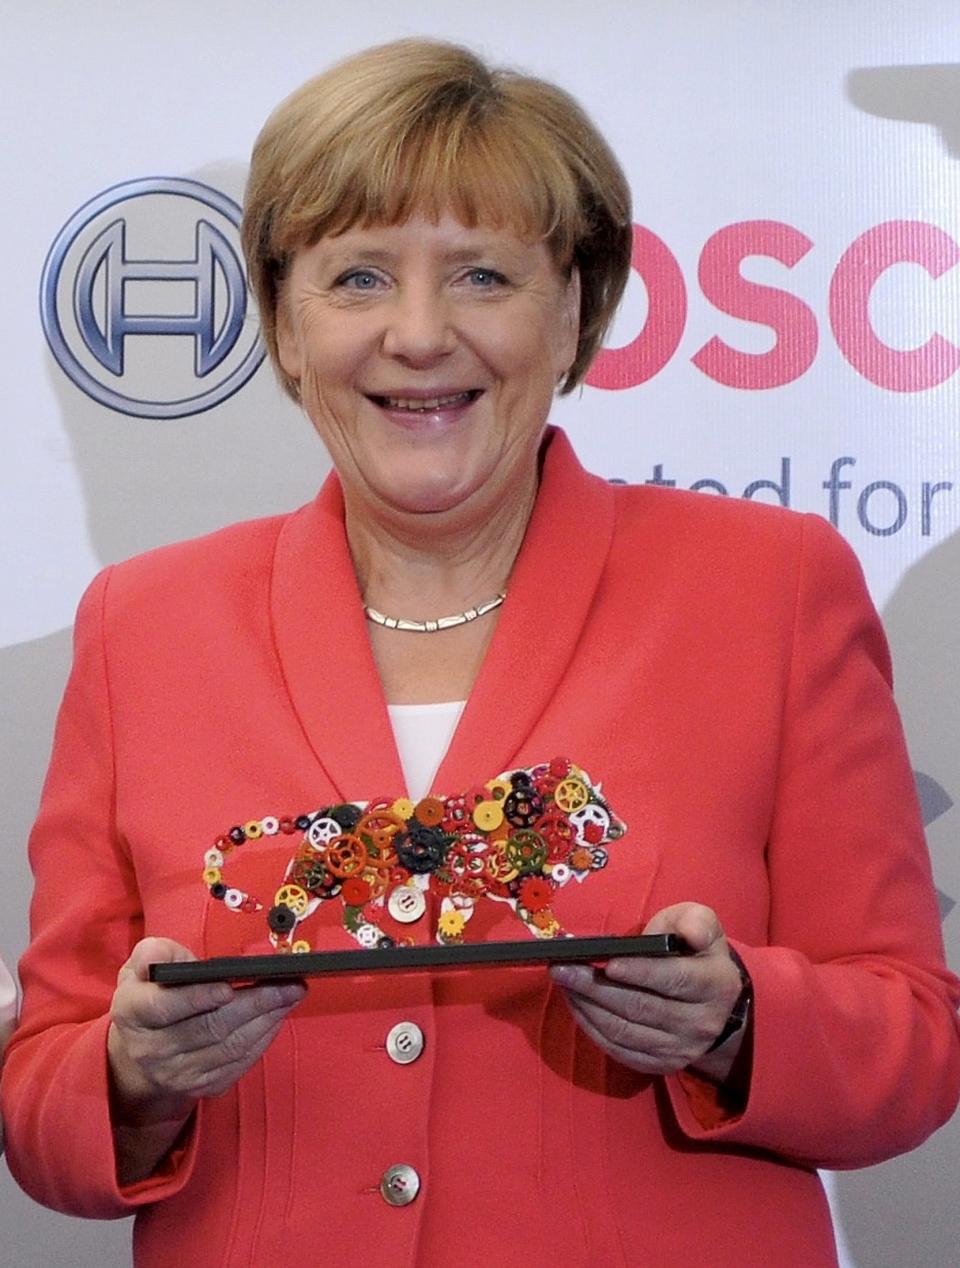 German Chancellor Merkel smiles as she holds a souvenir during a photo opportunity after her visit to the Bosch Vocational Center in Bengaluru